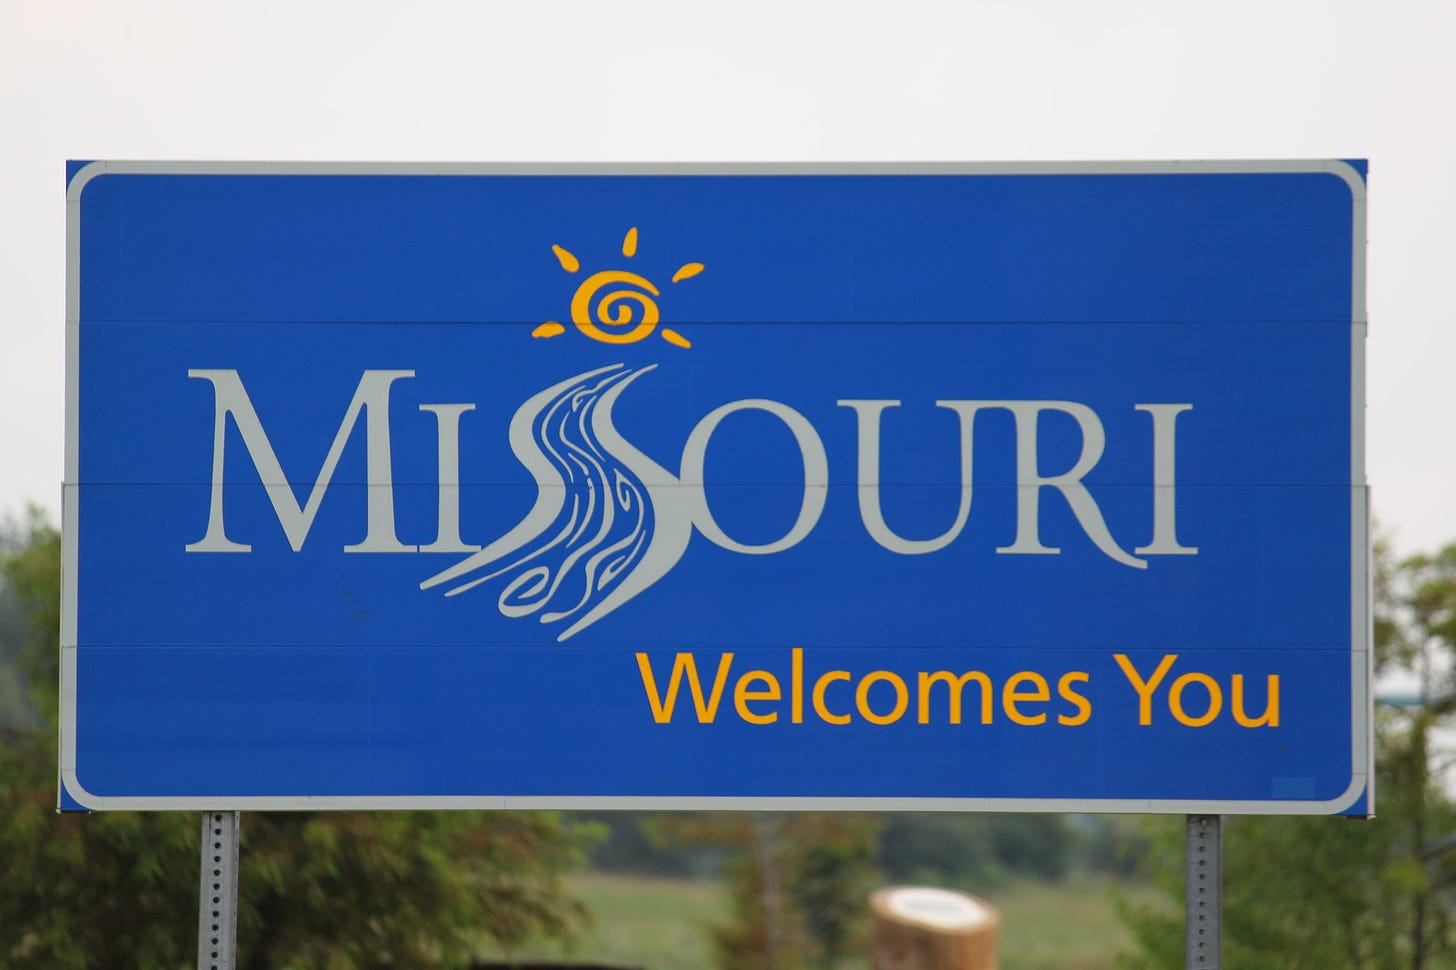 'Missouri welcomes you' sign